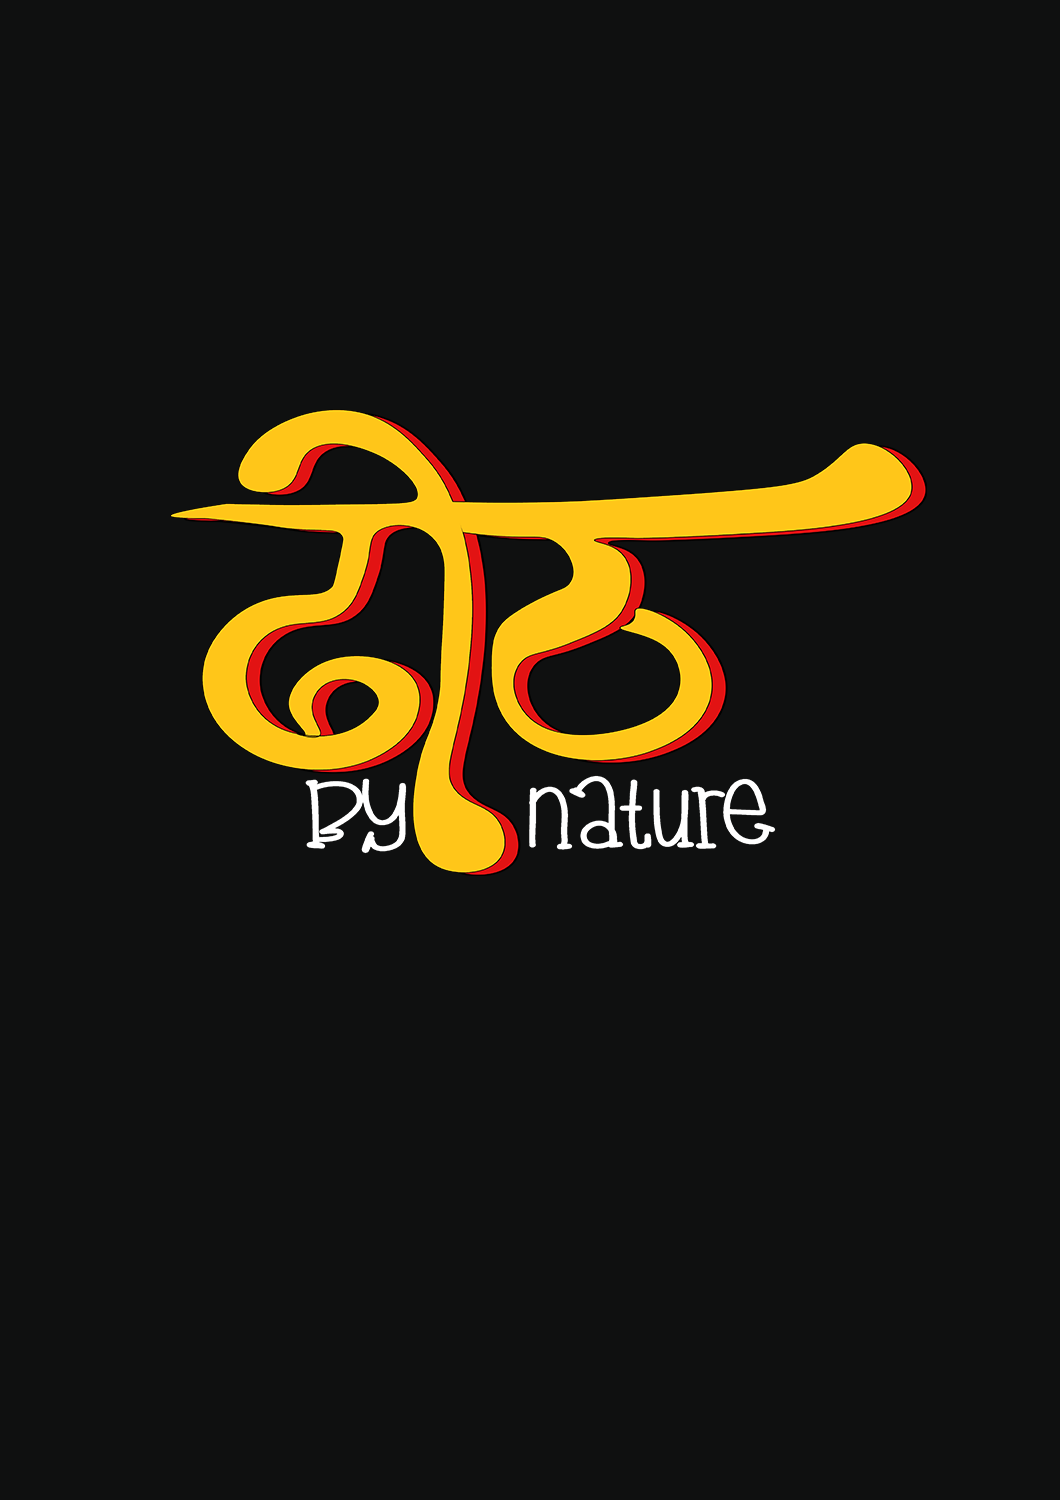 "DHEET BY NATURE" - HALF-SLEEVE T-SHIRT'S